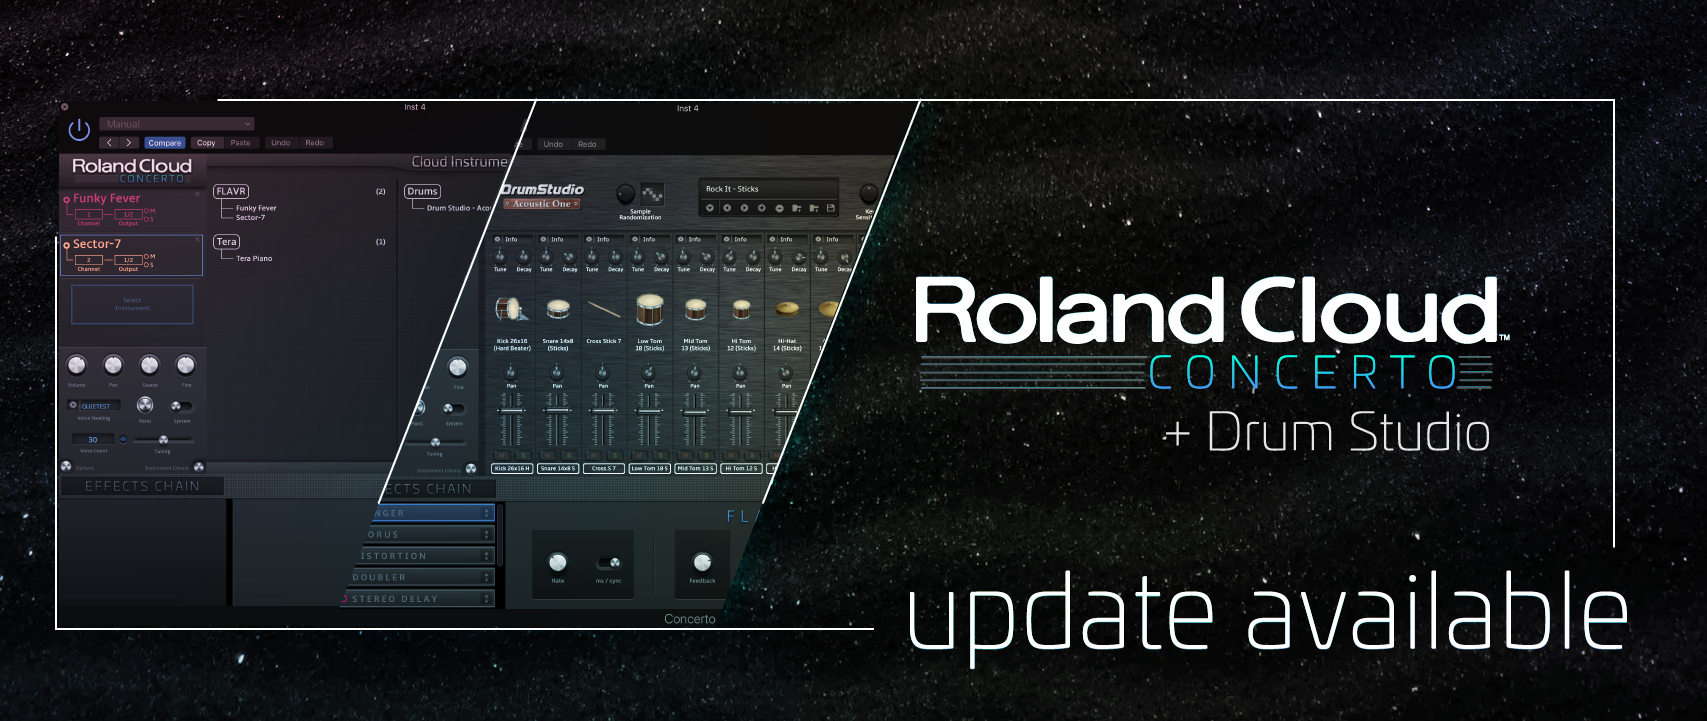 roland cloud free download